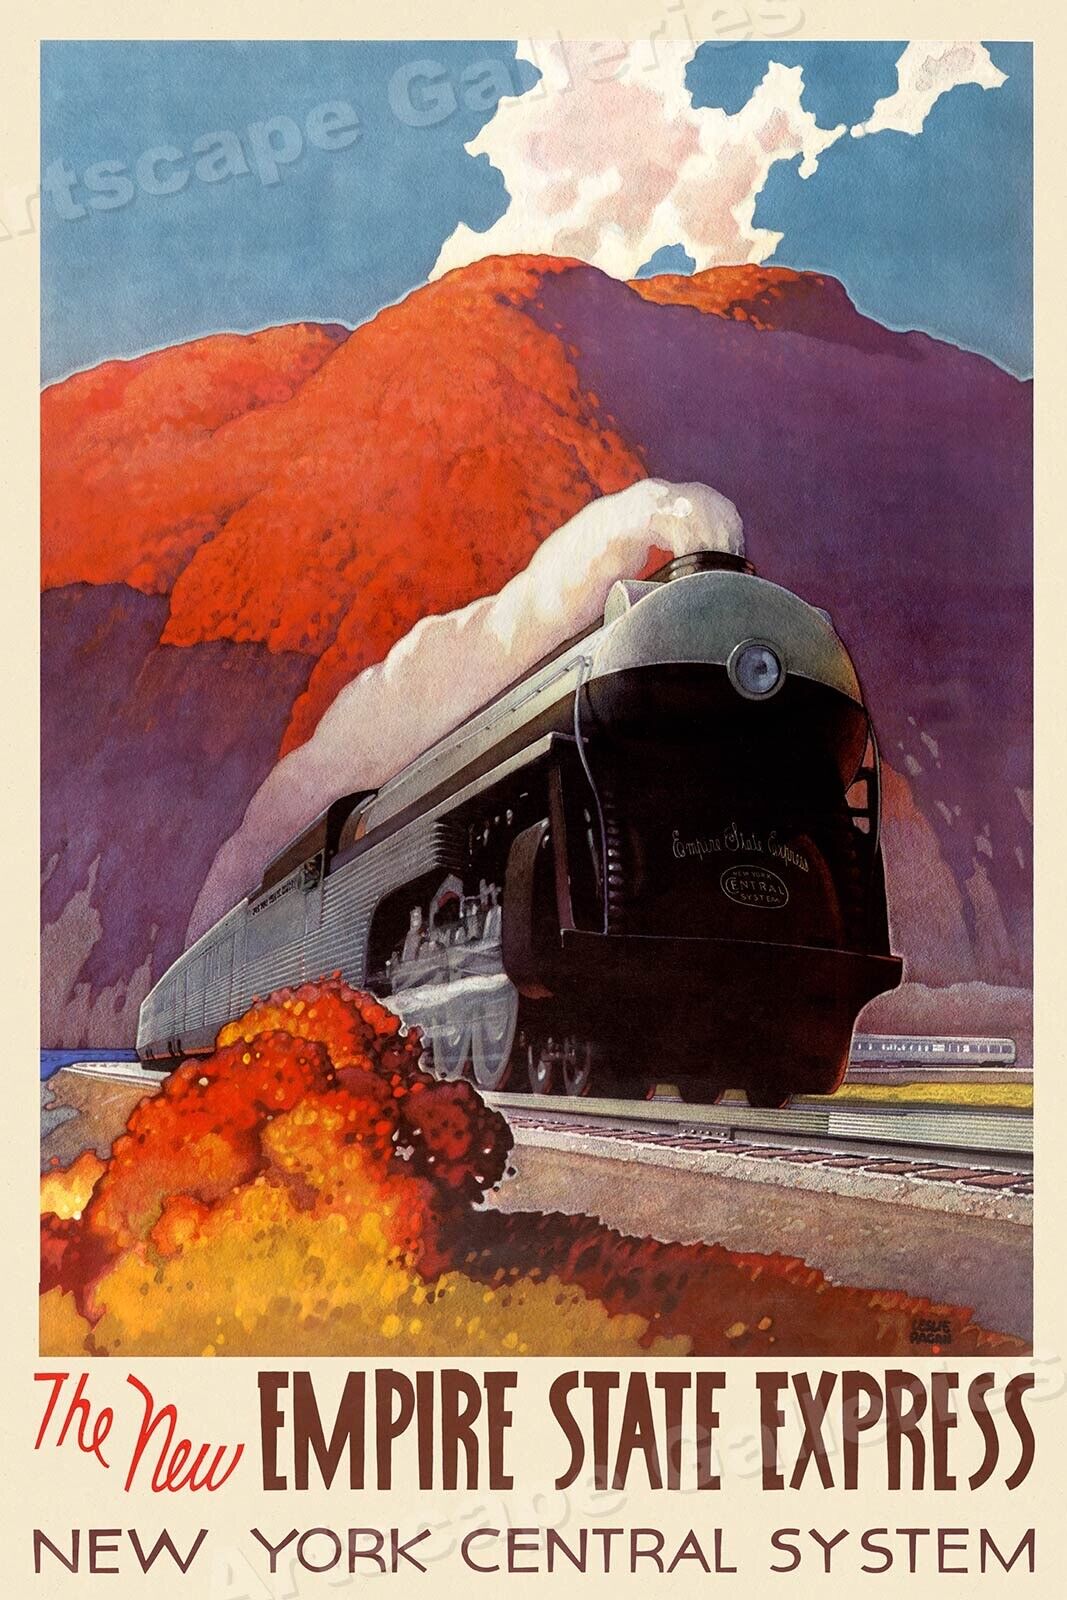 1940s Empire State Express New York Central System Classic Travel Poster - 24x36